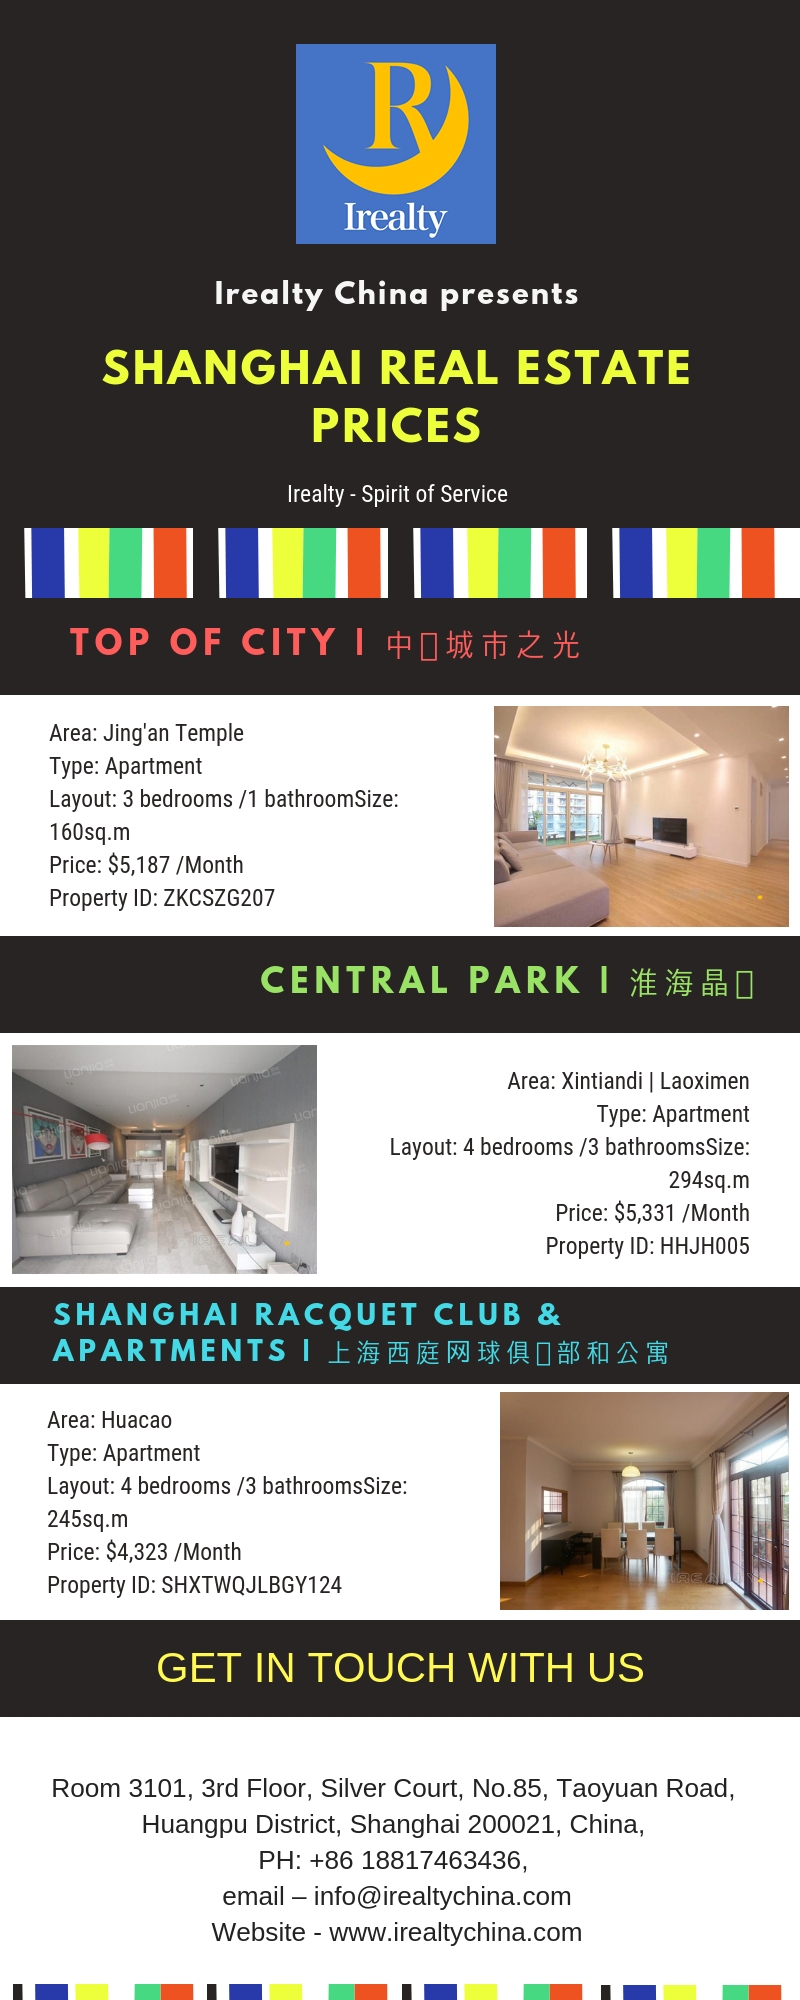 Shanghai real estate prices.jpg  by irealtychina